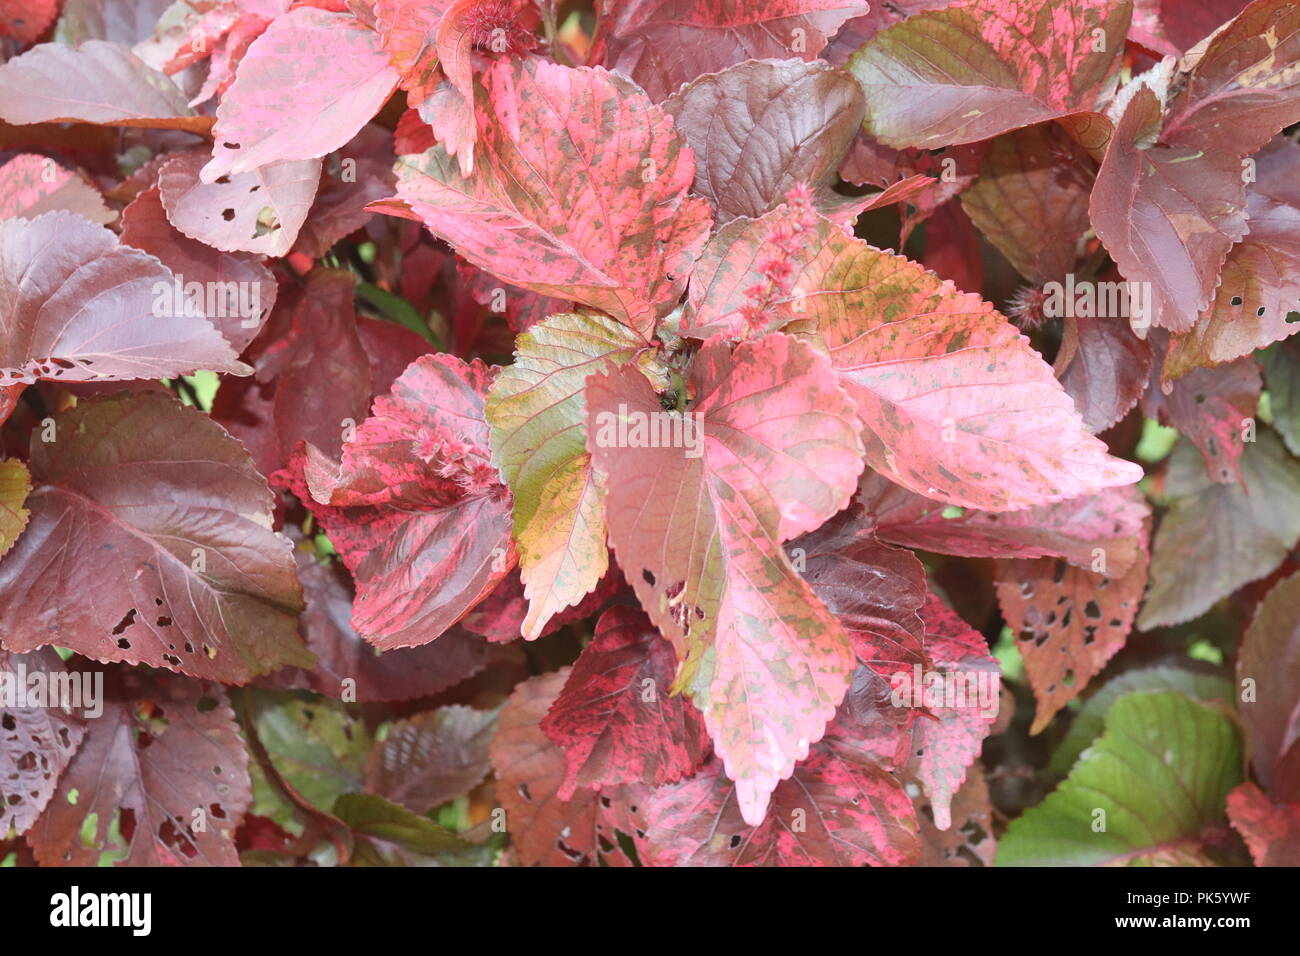 Colorful Flower Leaves.Its Really Amazing Scenery in Sunny Day. Stock Photo